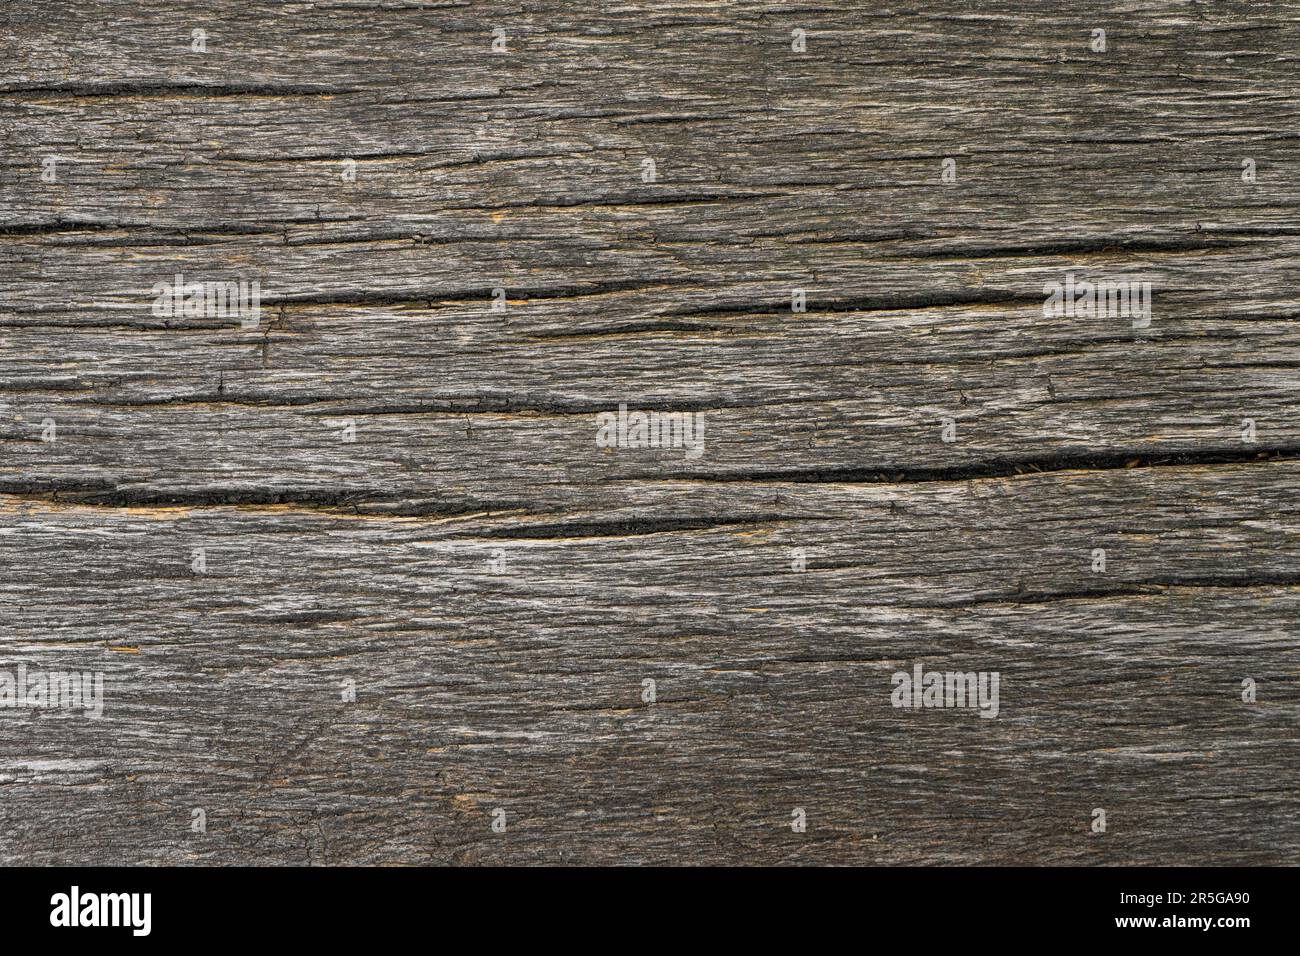 Old weathered wooden brown board structure with horizontal cracks. Close up natural grunge timber texture background, board floor, backdrop, wallpaper Stock Photo